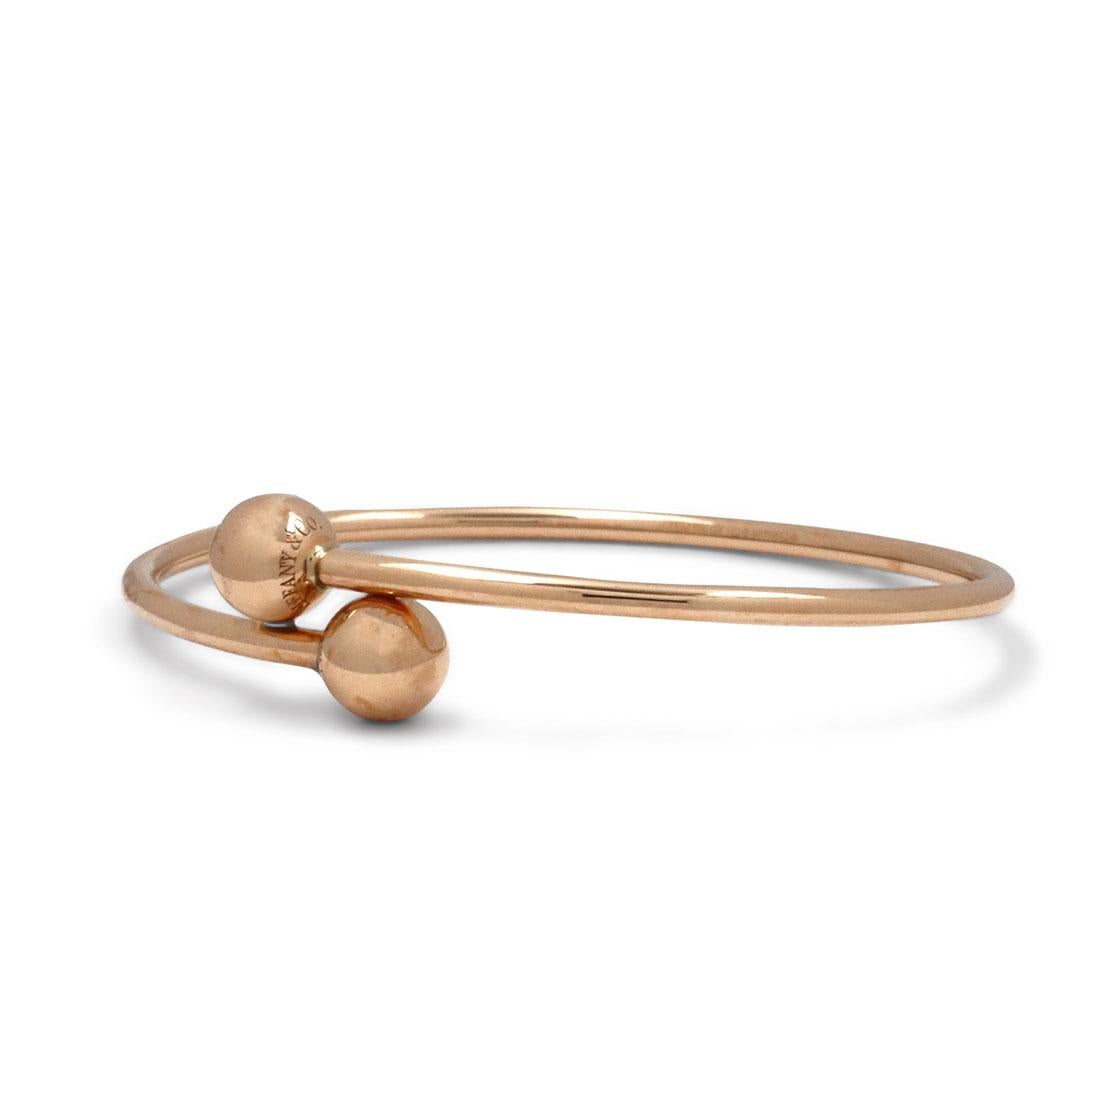 Authentic Tiffany & Co. 'HardWear Ball Bypass' bangle bracelet crafted in 18 karat rose gold. Will fit up to 5 1/4 inch wrist. Signed Tiffany & Co., Au750, ITALY on the base of the bangle and 'TIFFANY & CO', 'NEW YORK' on the ball ends. The bracelet